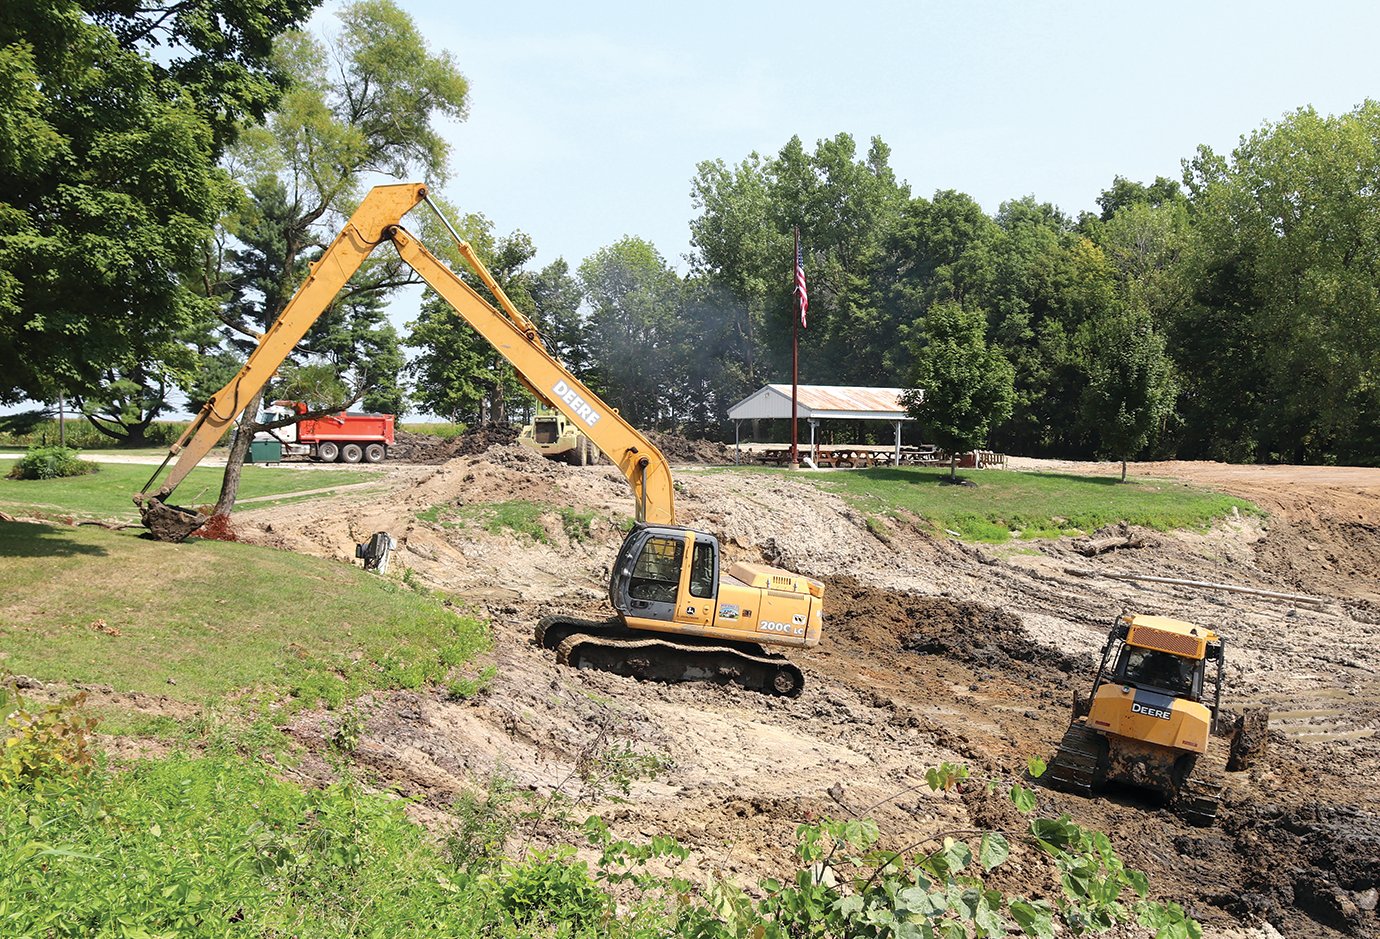 Crews work with heavy equipment Tuesday to remove silt from the pond at the Darlington Conservation Club. When the project is complete, the pond will be roughly five feet deeper than before and restocked with game fish.